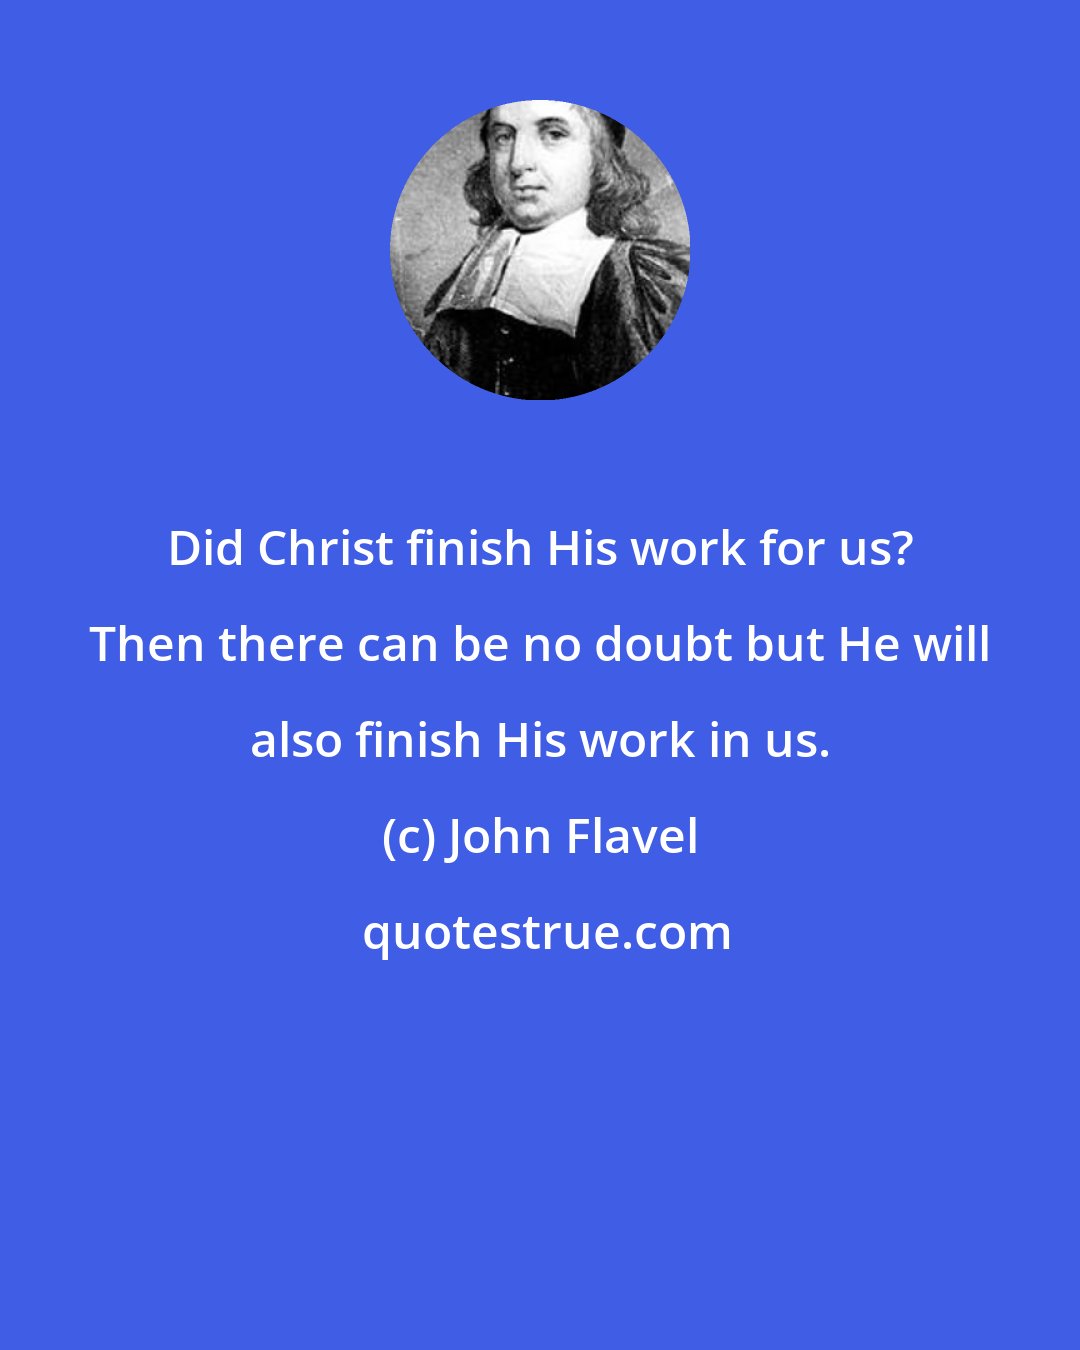 John Flavel: Did Christ finish His work for us? Then there can be no doubt but He will also finish His work in us.